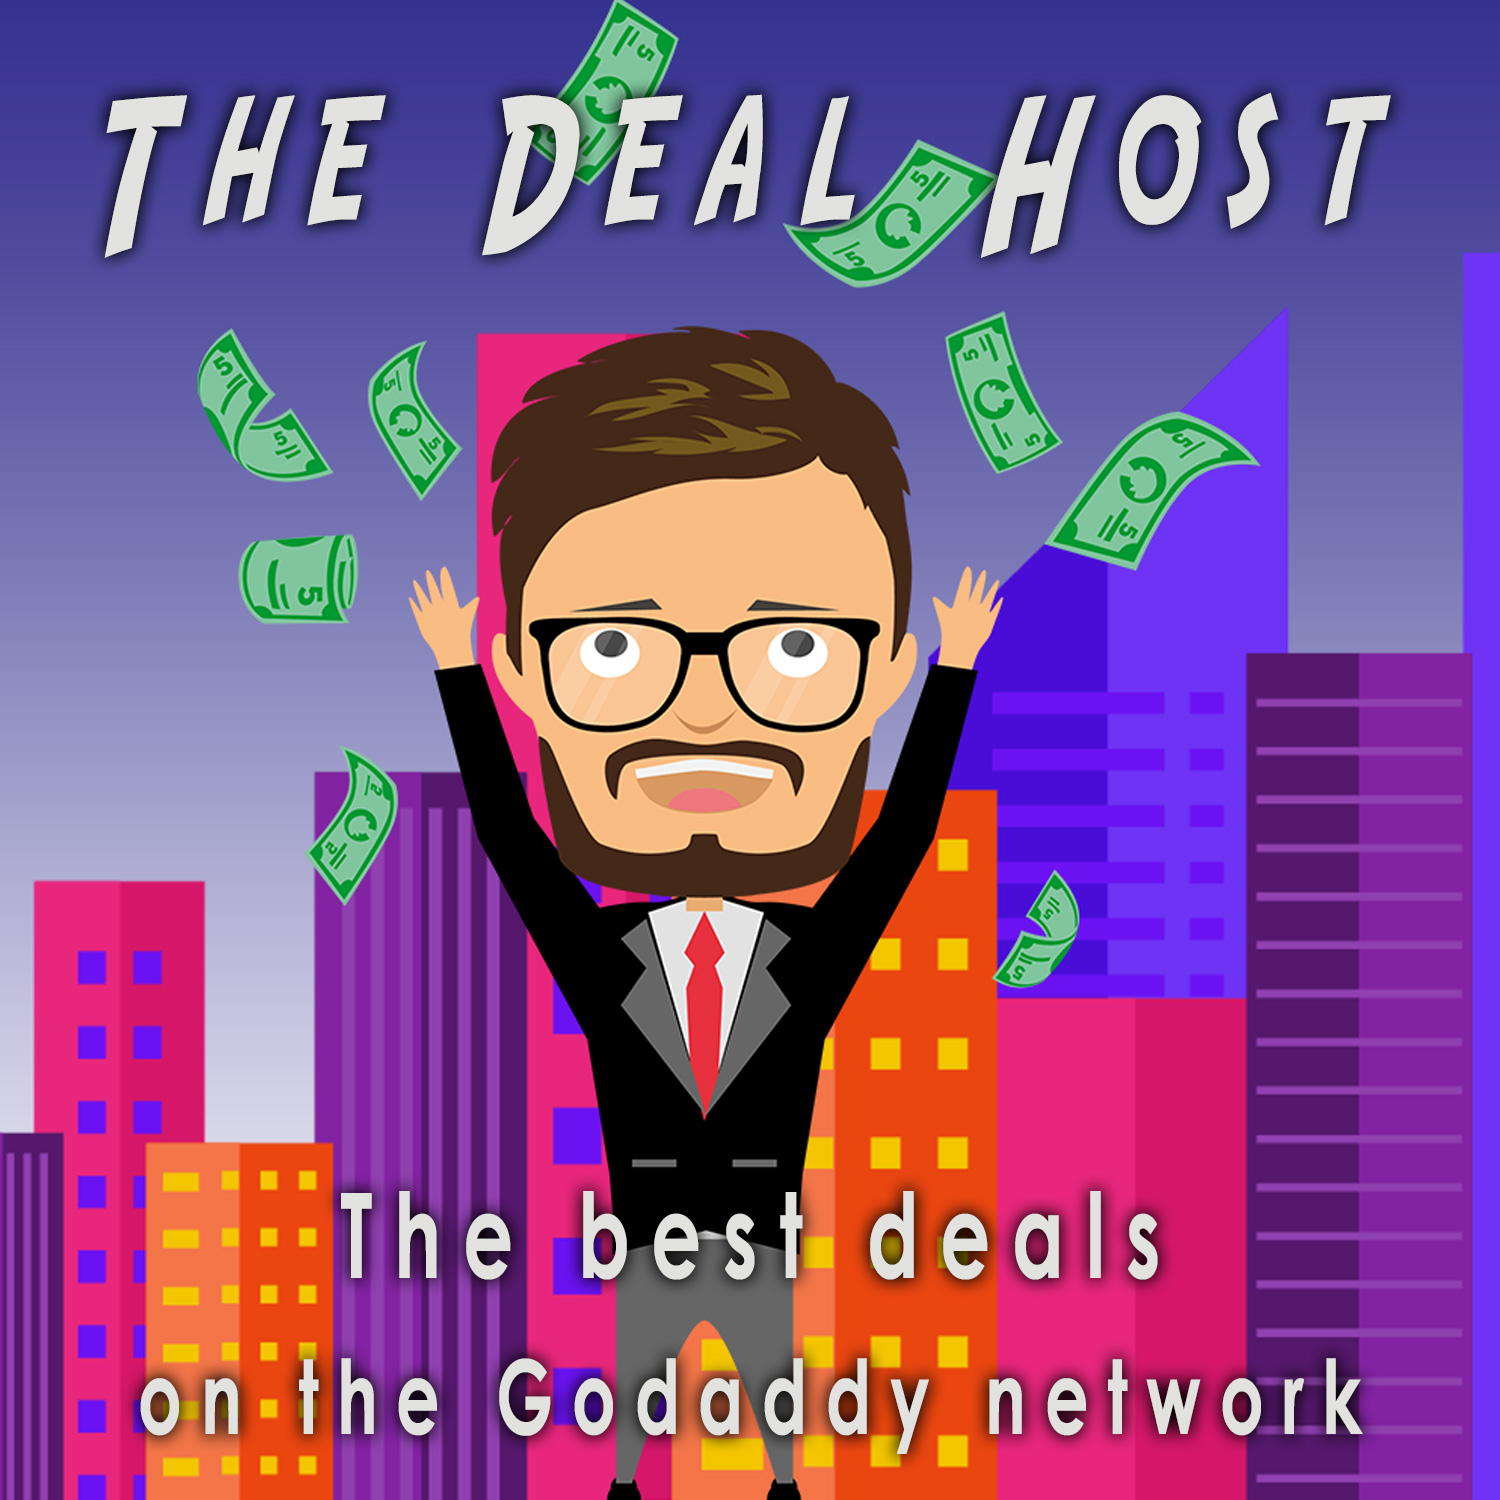 The Deal Host